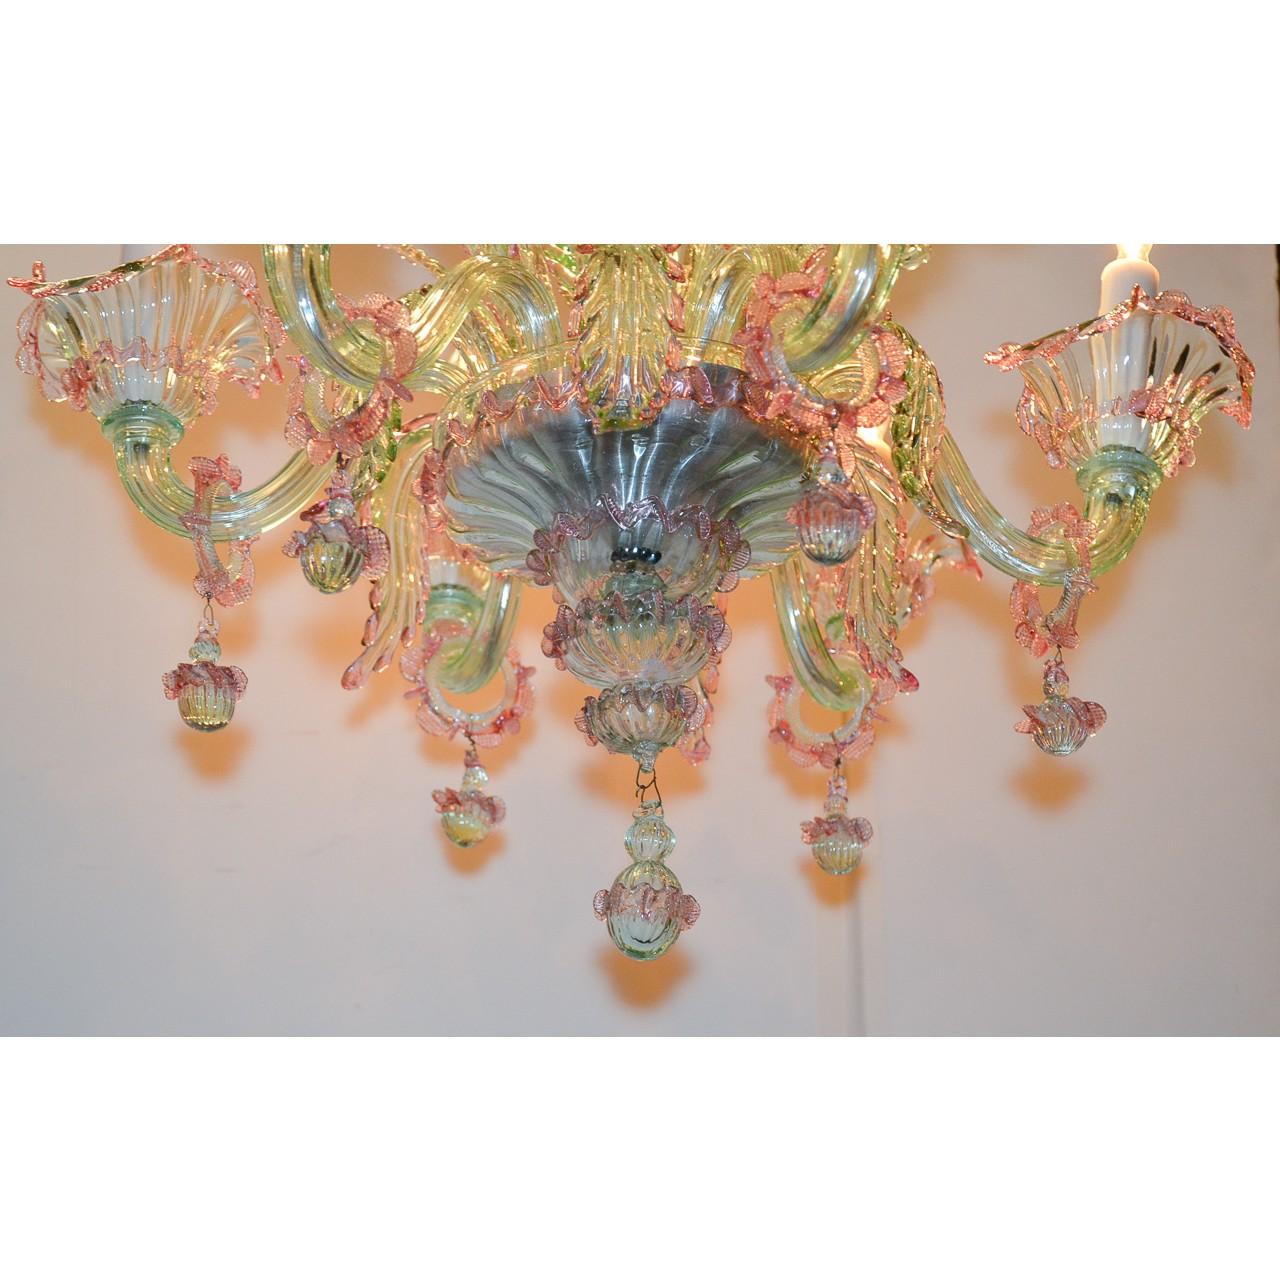 Beautiful Italian Murano glass chandelier in hues of rose, blue, lavender, and green. The vase-shaped crown atop a tapered and bulbous stem that lead to large and colorful leaf sprays. Mounted with six scrolling arms accented with unique glass rings